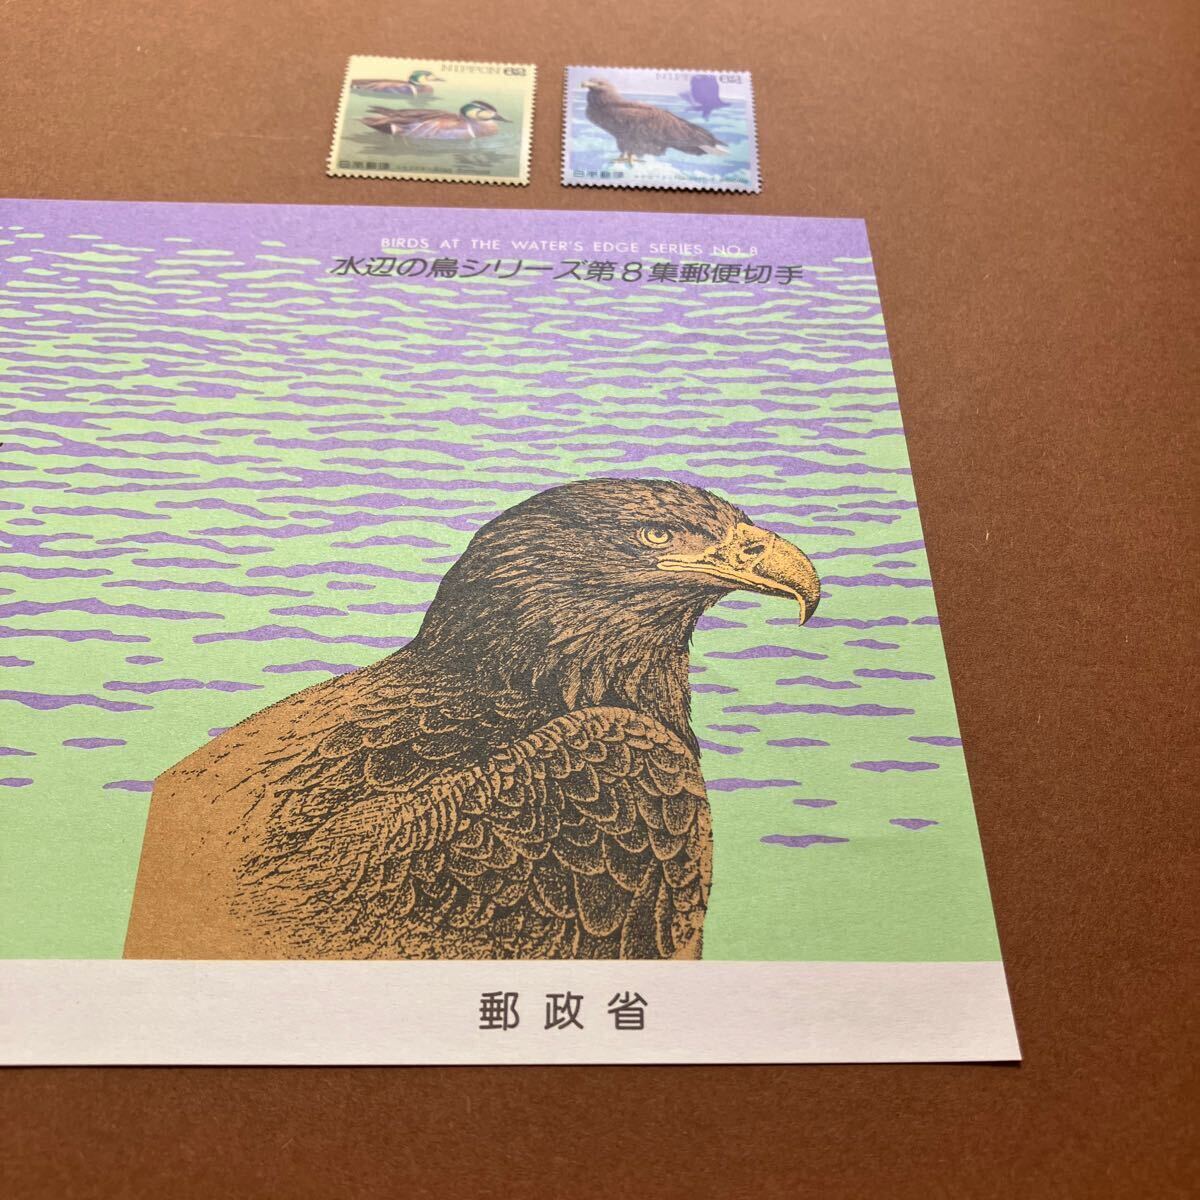  waterside bird series no. 8 compilation mail stamp /1993 year issue /62 jpy stamp / single one-side summarize /tomoegamo/oji lower si/ pamphlet ( instructions manual ) attaching / unused / wild bird 